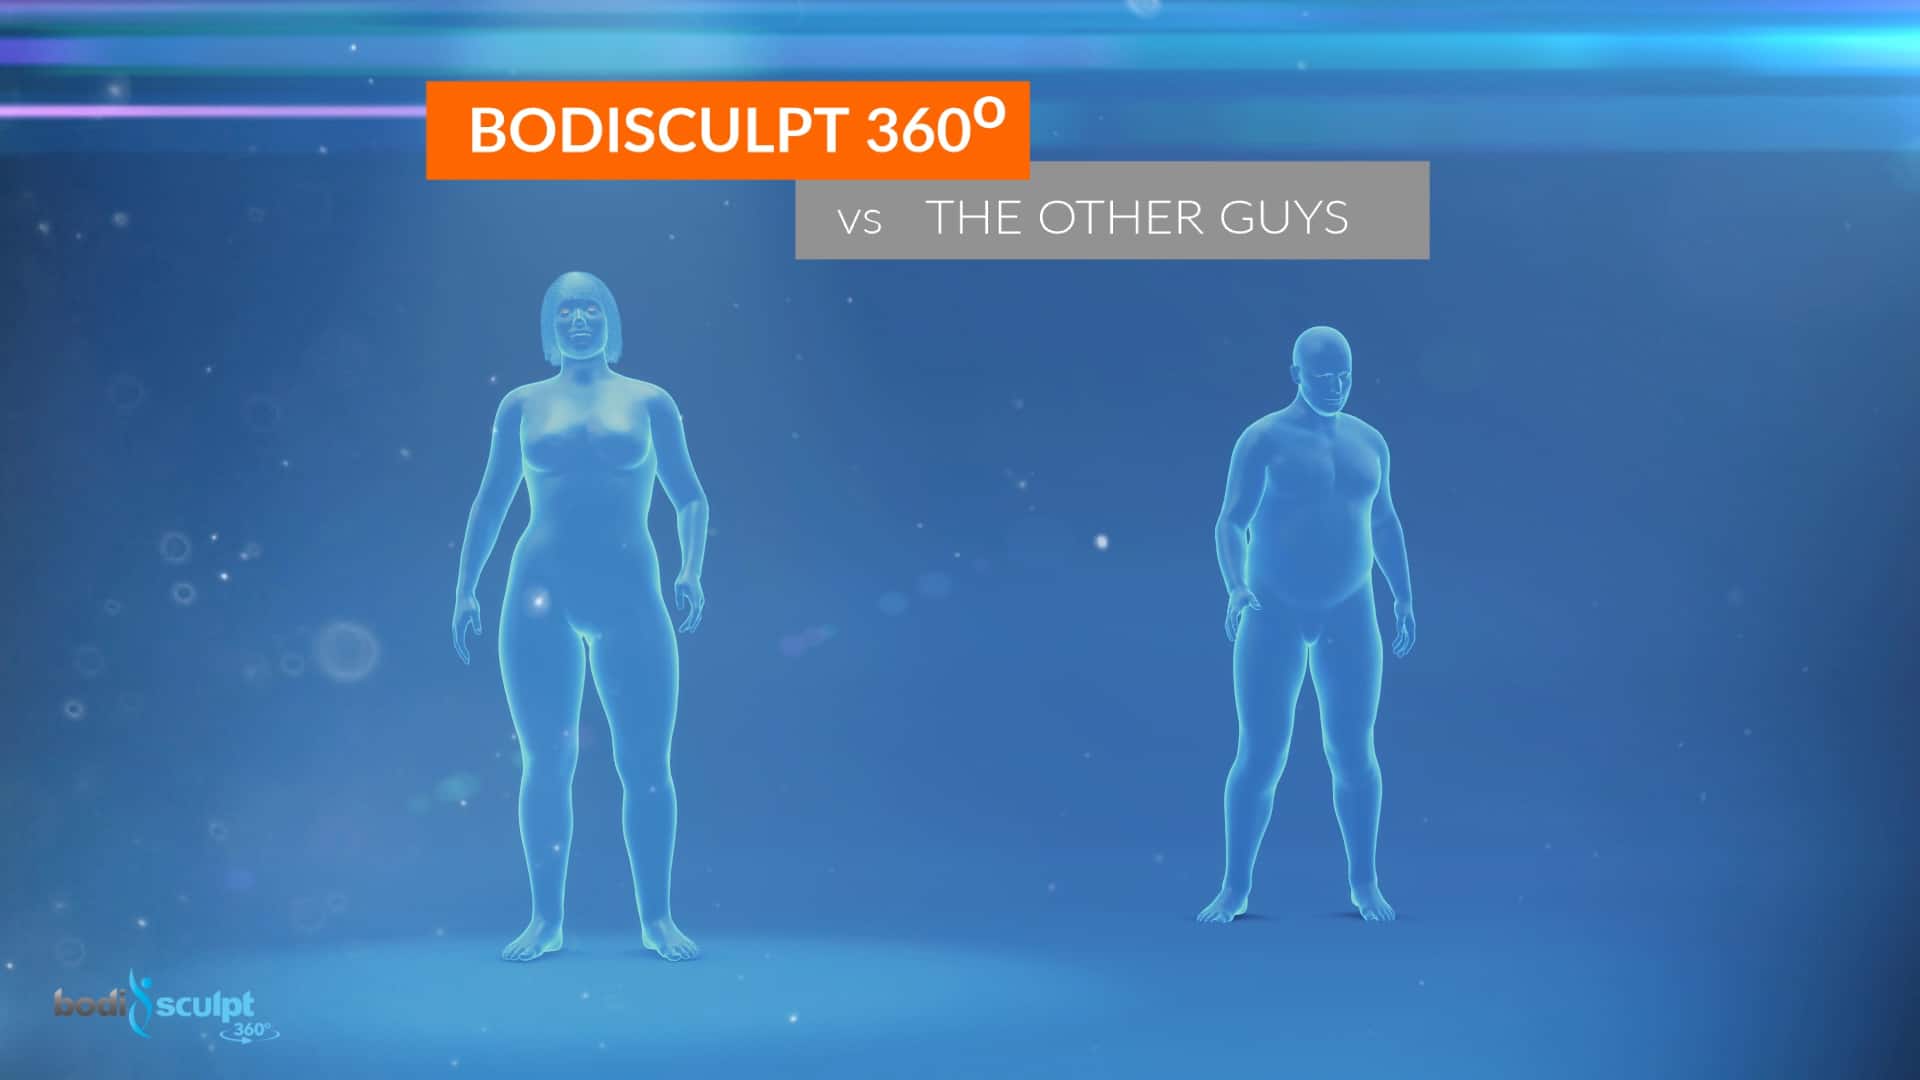 Bodisculpt 360 Vs The Other Guys